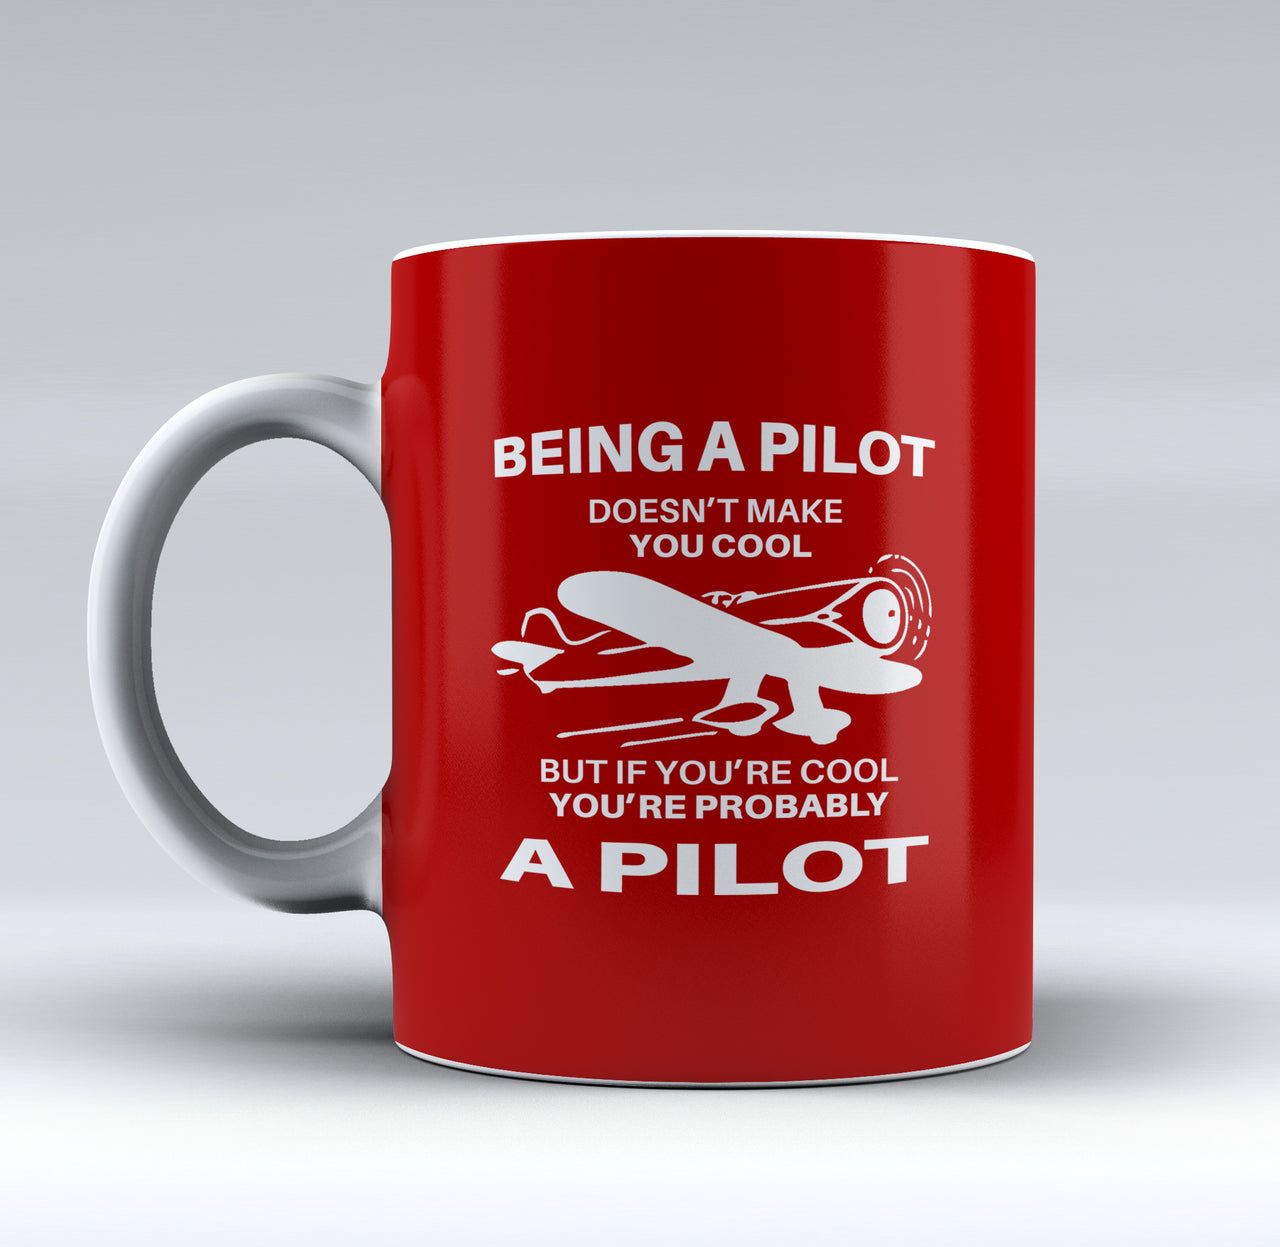 If You're Cool You're Probably a Pilot Designed Mugs